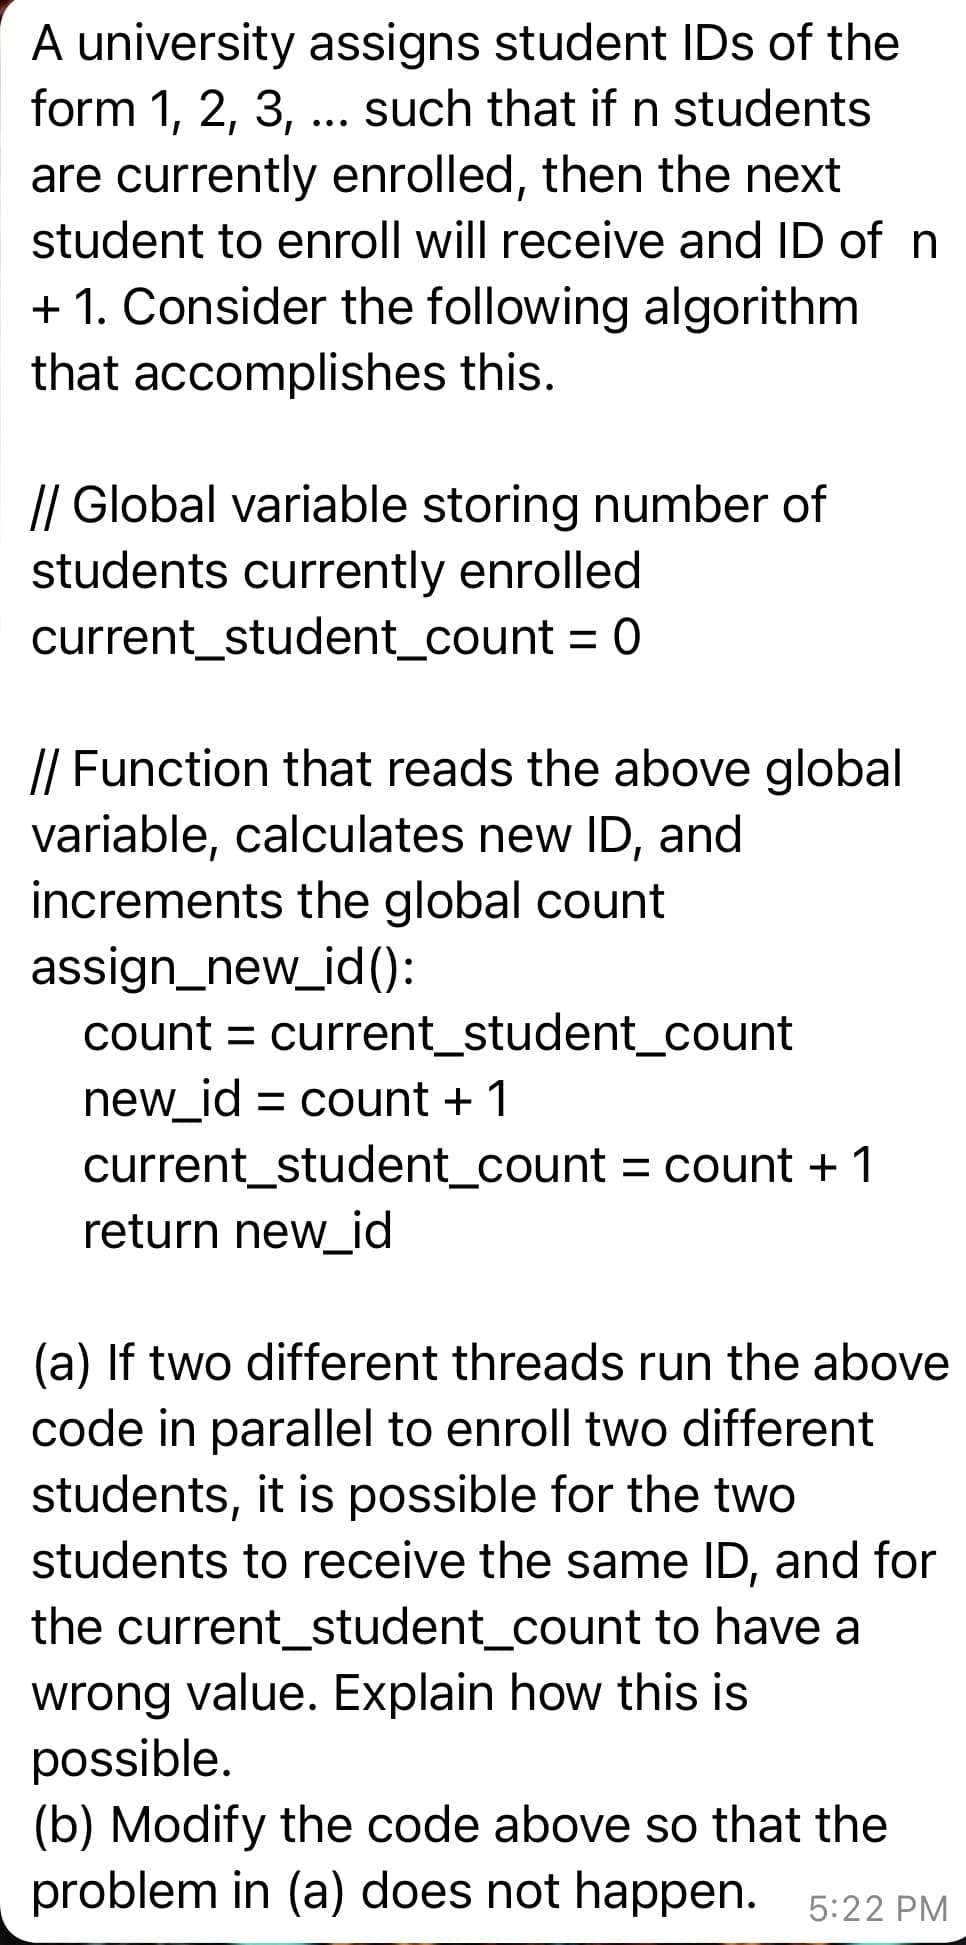 A university assigns student IDs of the
form 1, 2, 3, ... such that if n students
are currently enrolled, then the next
student to enroll will receive and ID of n
+ 1. Consider the following algorithm
that accomplishes this.
// Global variable storing number of
students currently enrolled
current_student_count = 0
// Function that reads the above global
variable, calculates new ID, and
increments the global count
assign_new_id():
count = current_student_count
new_id = count + 1
current_student_count = count + 1
return new_id
(a) If two different threads run the above
code in parallel to enroll two different
students, it is possible for the two
students to receive the same ID, and for
the current_student_count to have a
wrong value. Explain how this is
possible.
(b) Modify the code above so that the
problem in (a) does not happen. 5:22 PM
